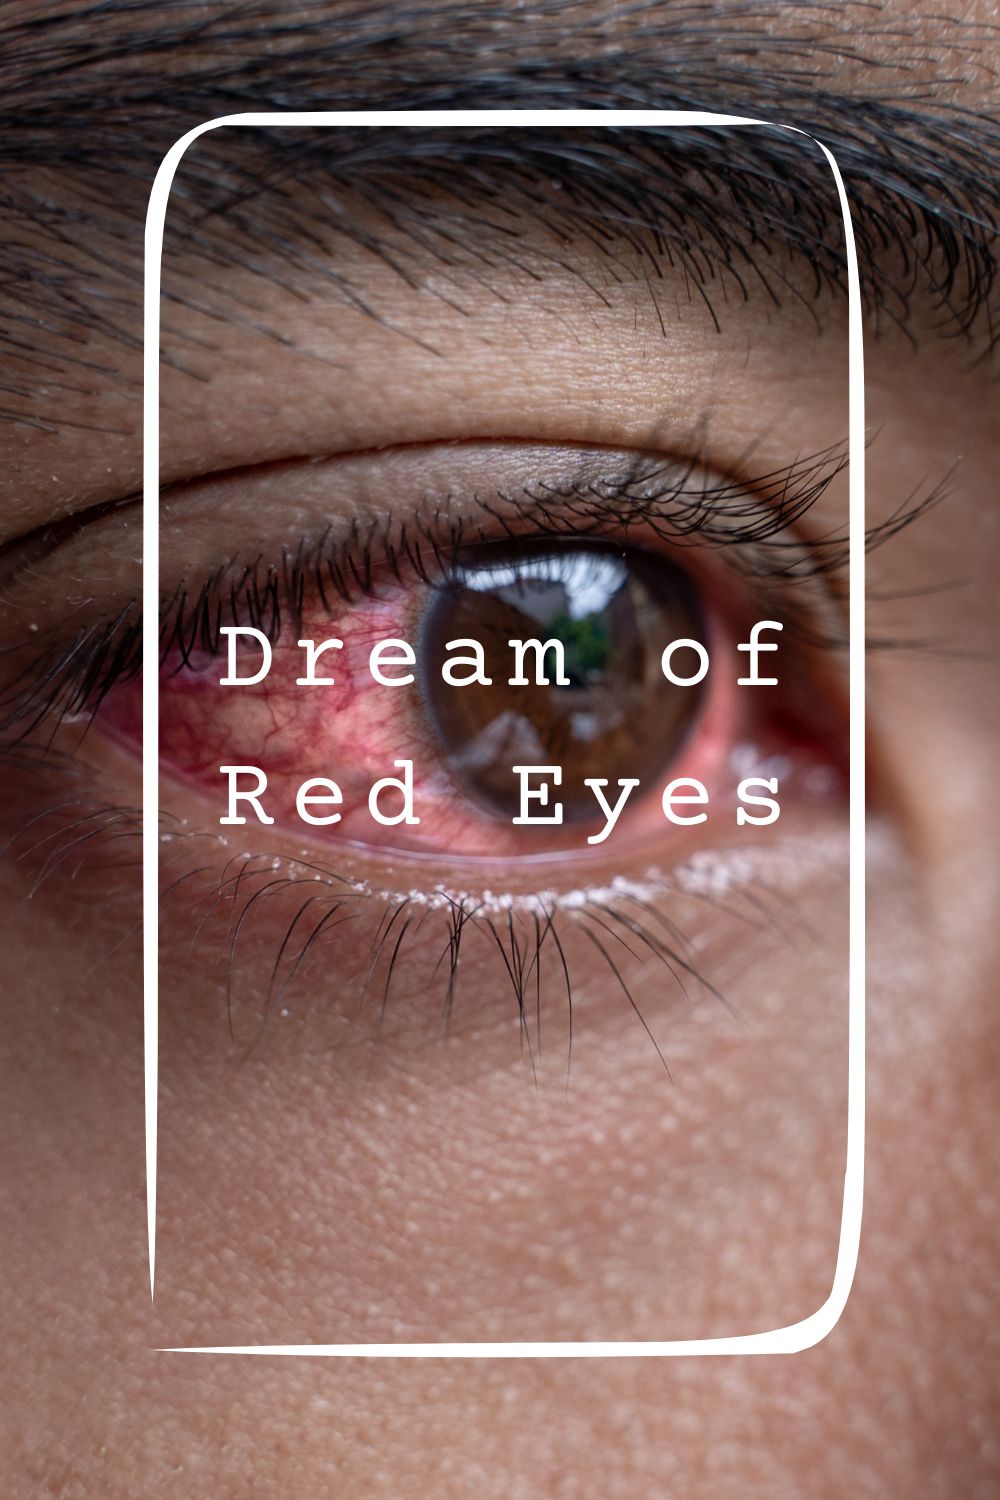 15 Dream of Red Eyes Meanings1